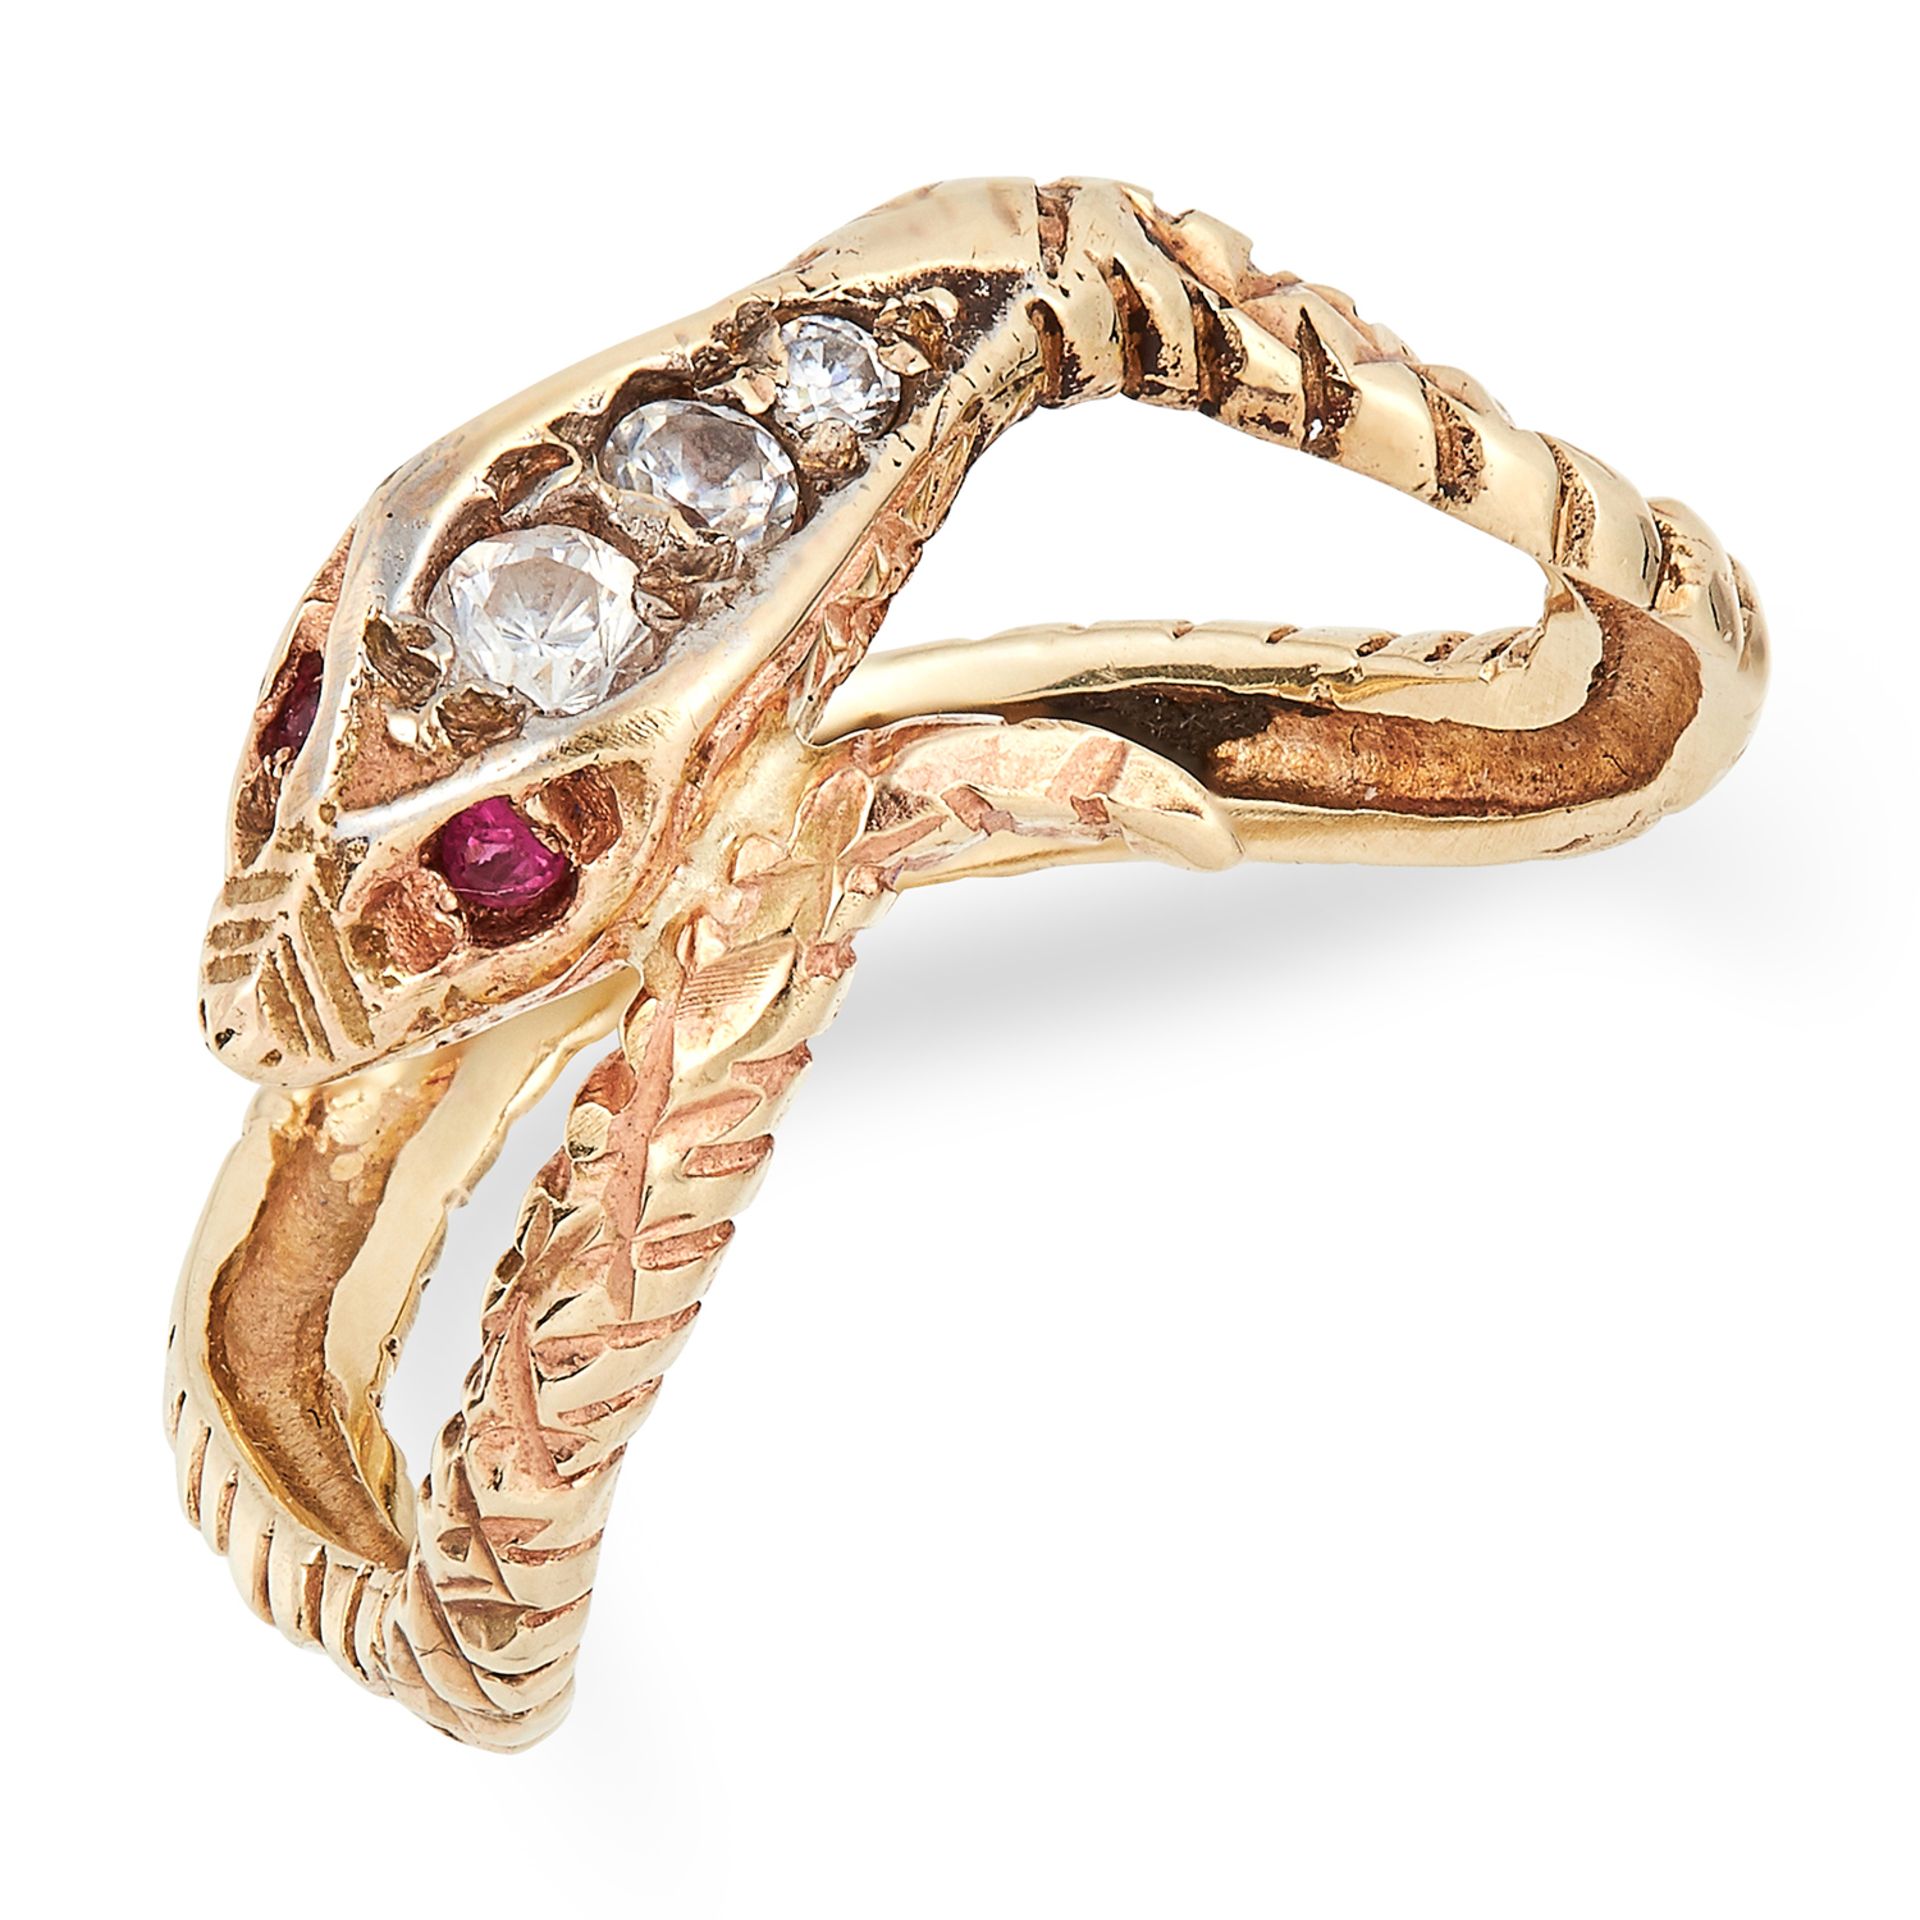 ANTIQUE RUBY SNAKE RING set with round cut rubies and white gemstones, size K / 5, 2.4g.